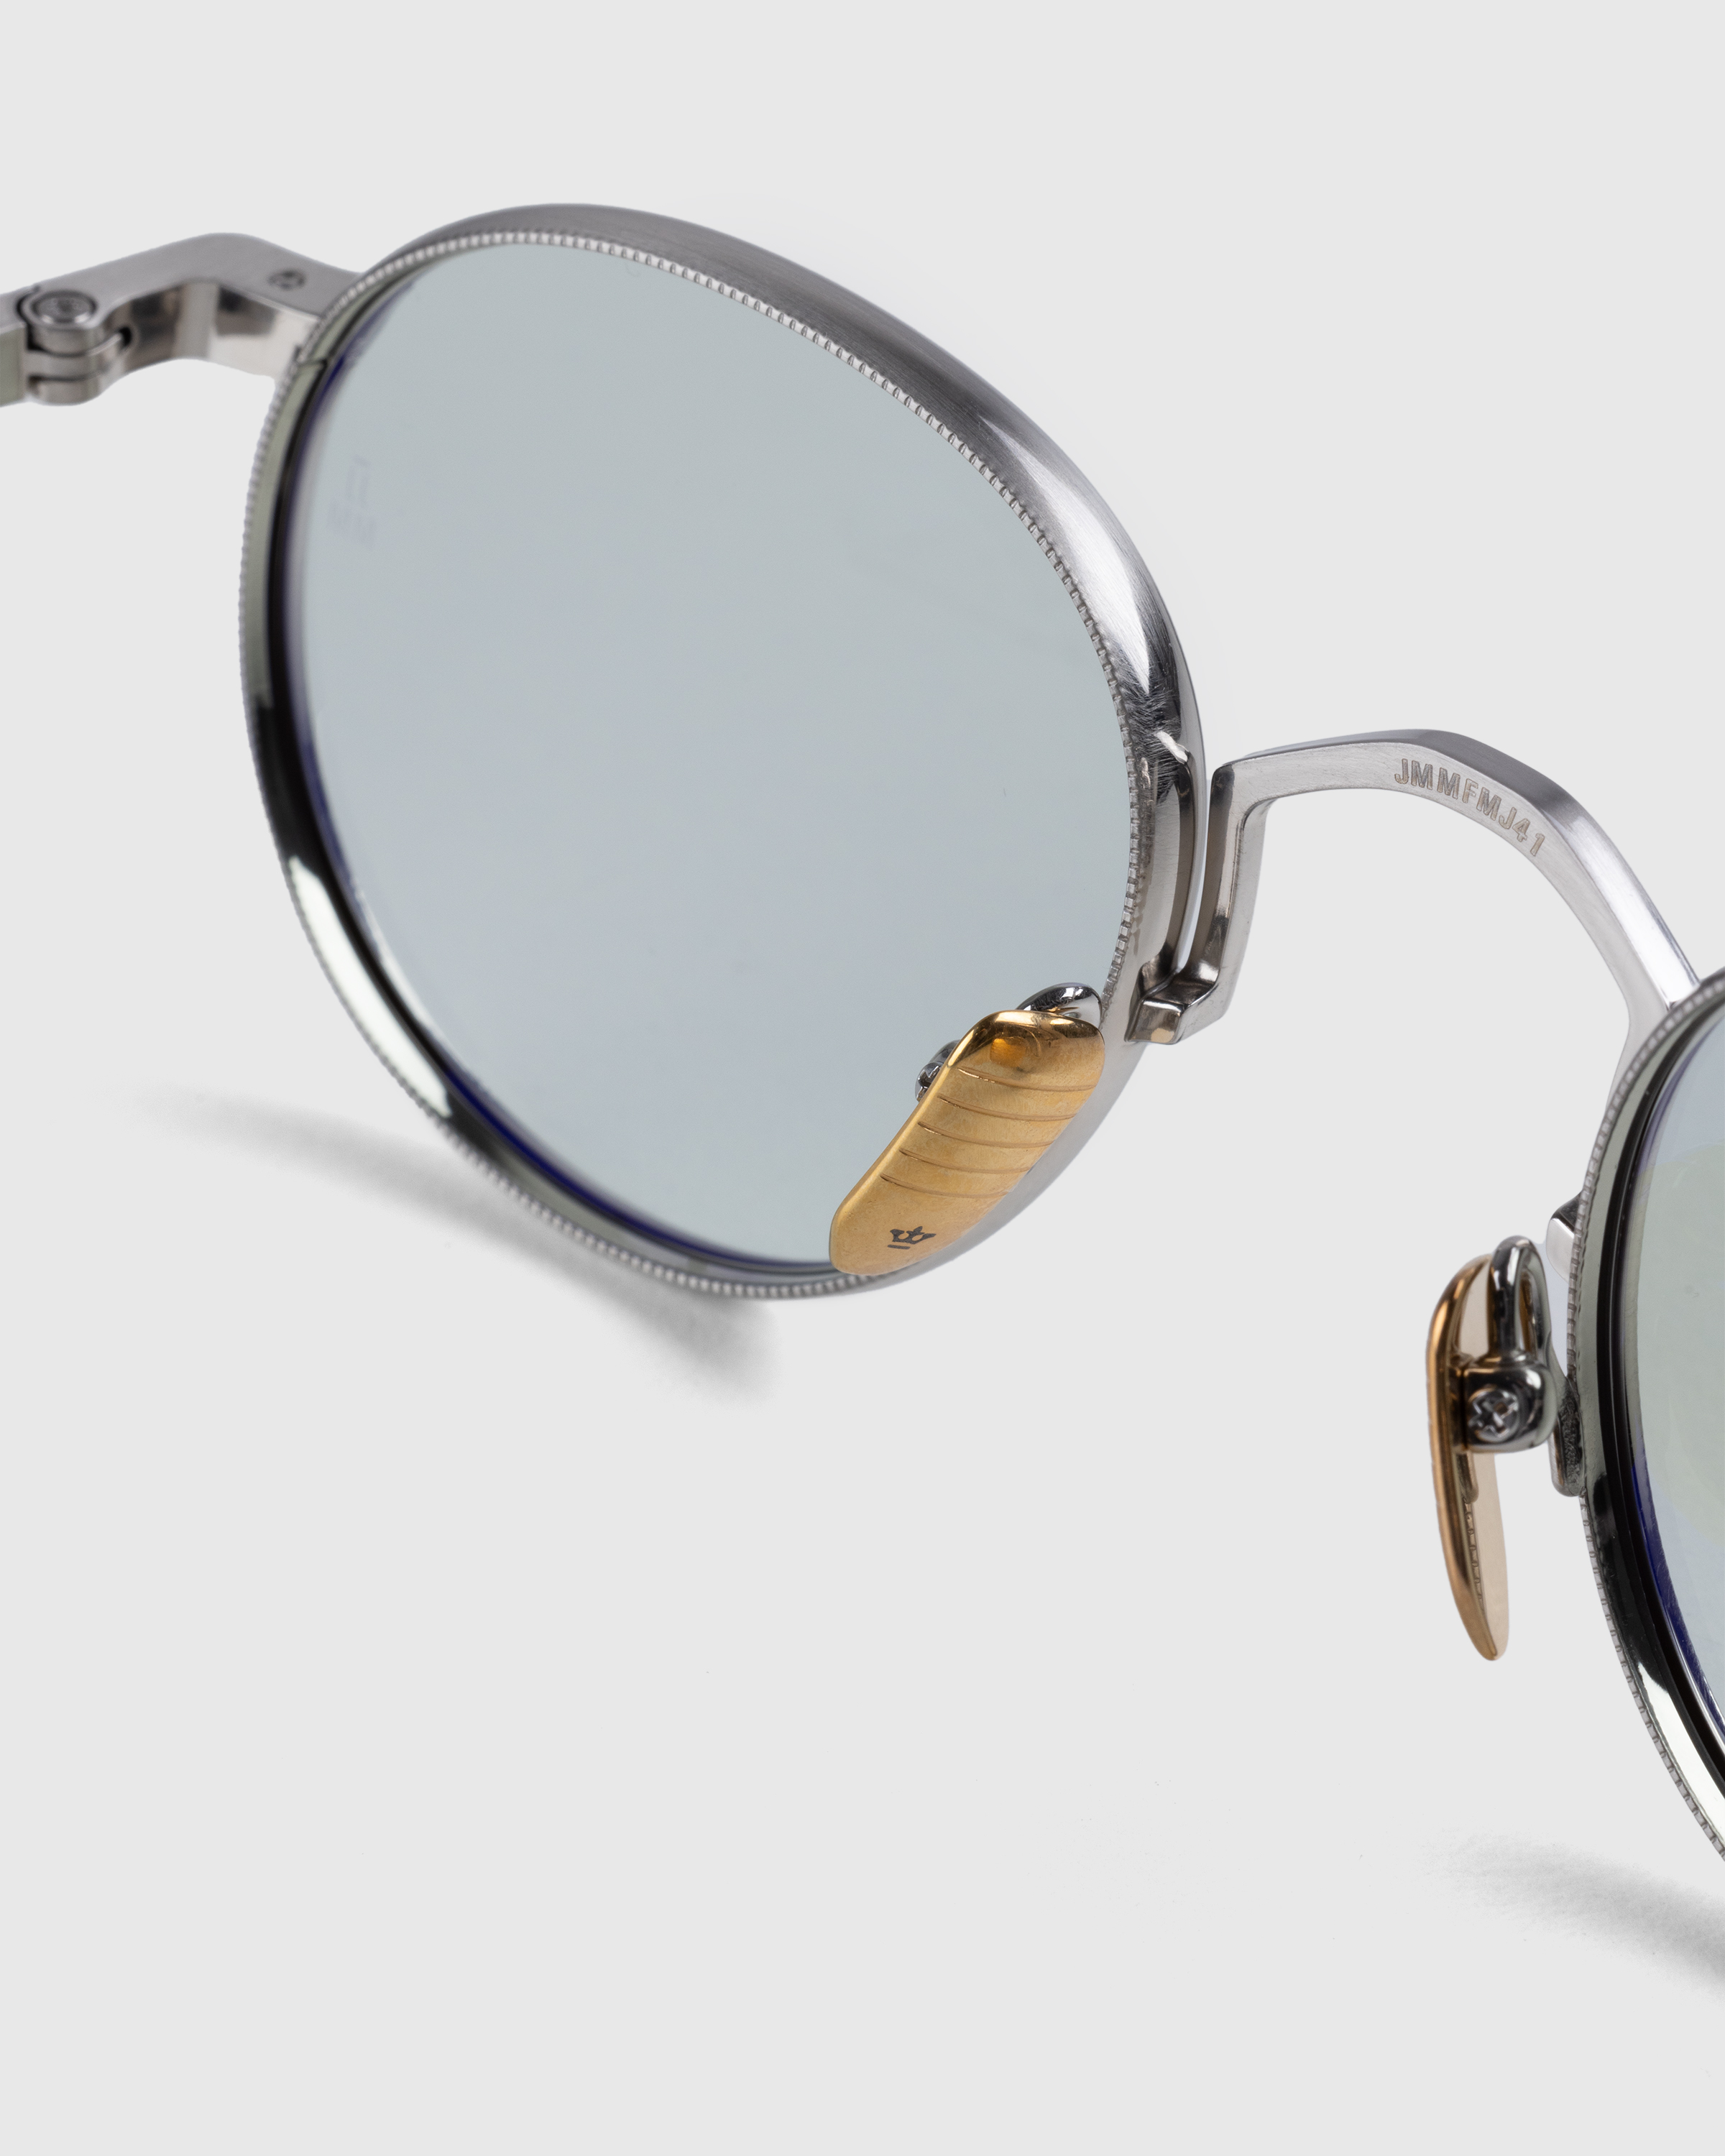 Jacques Marie Mage – Full Metal Jacket Silver - Sunglasses - Silver - Image 5